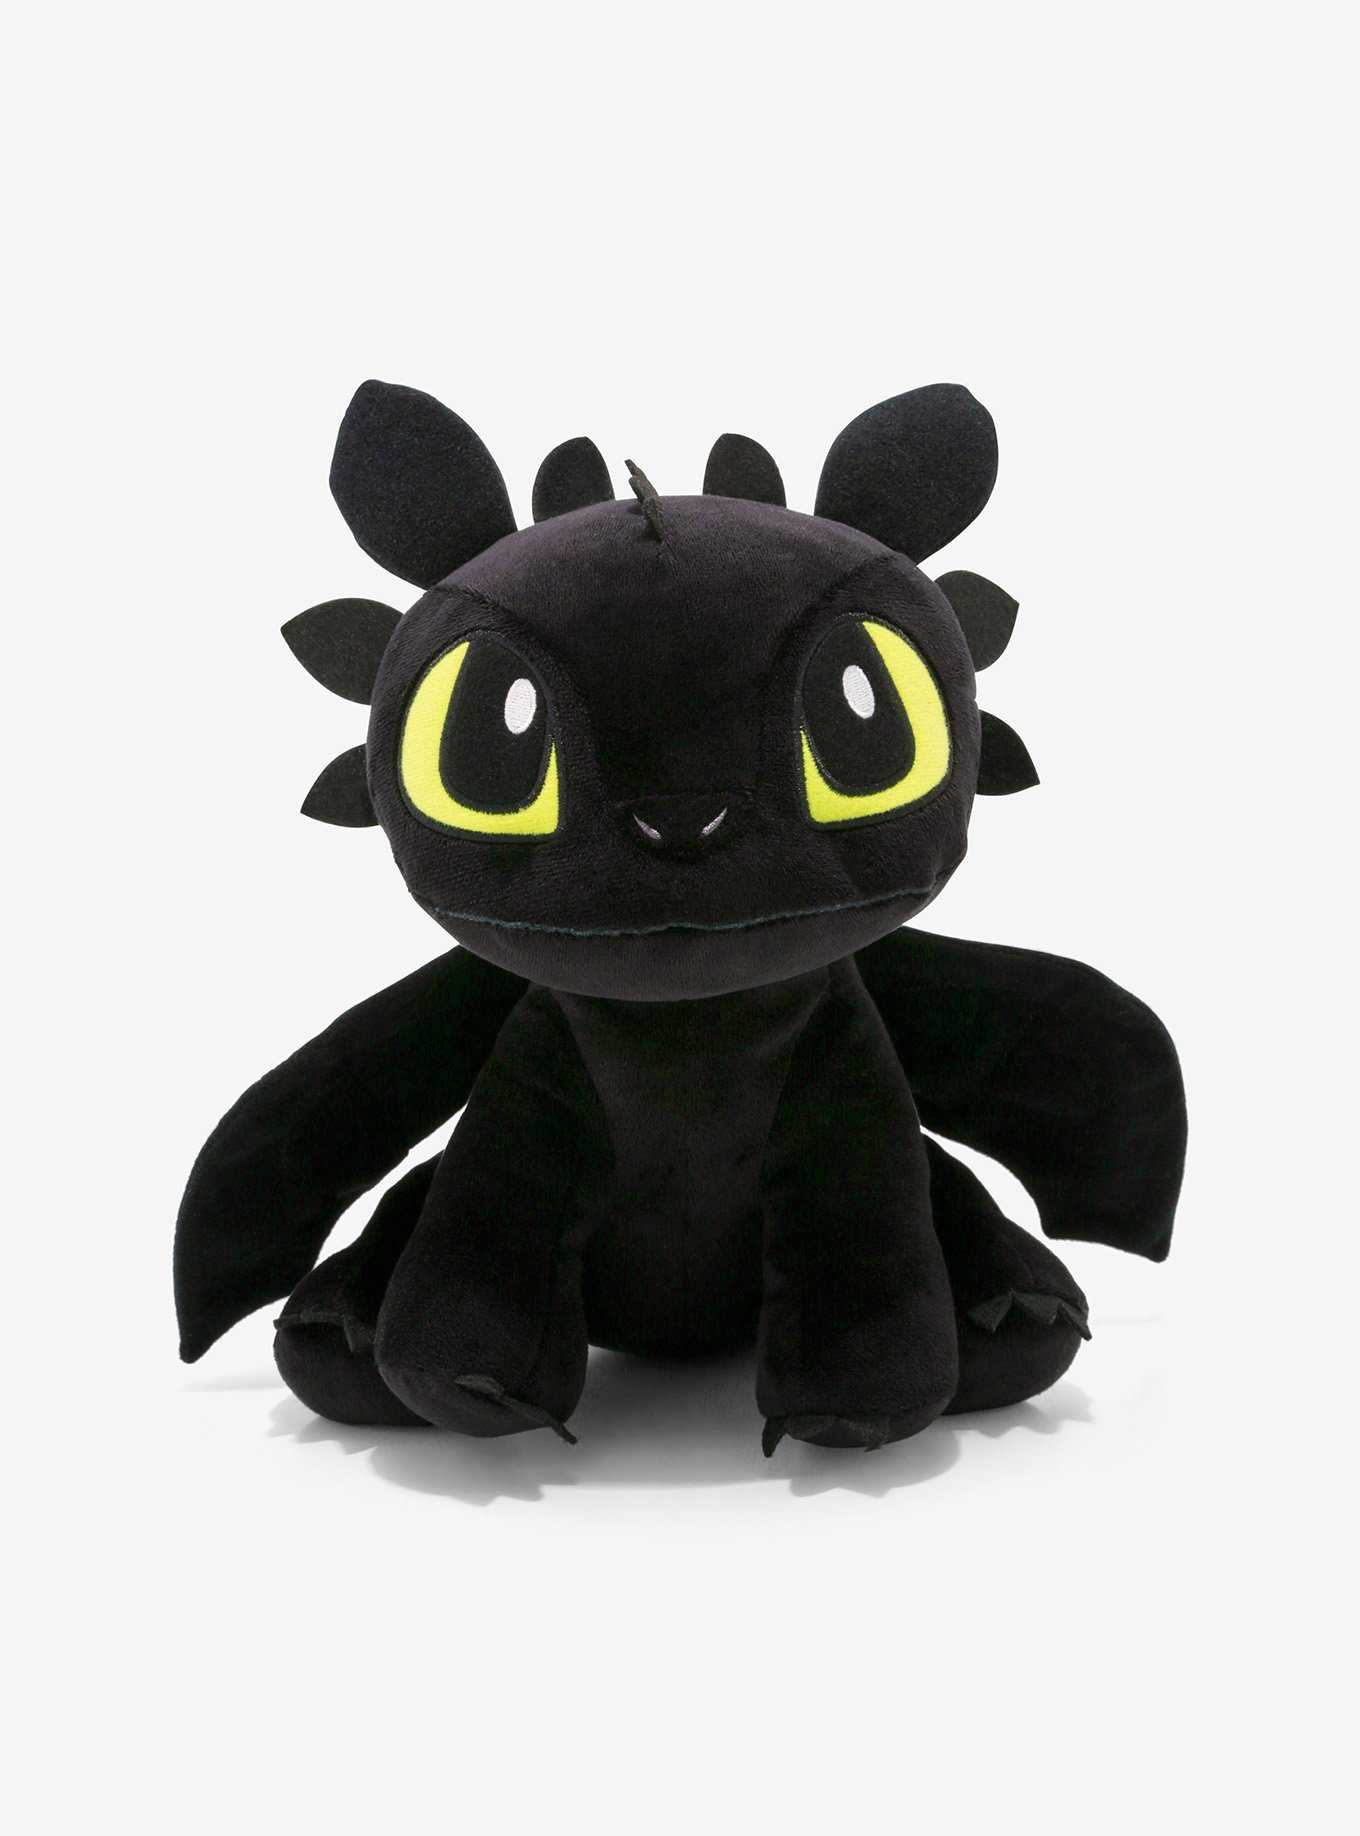 DreamWorks How to Train Your Dragon Toothless 9 Inch Plush, , hi-res